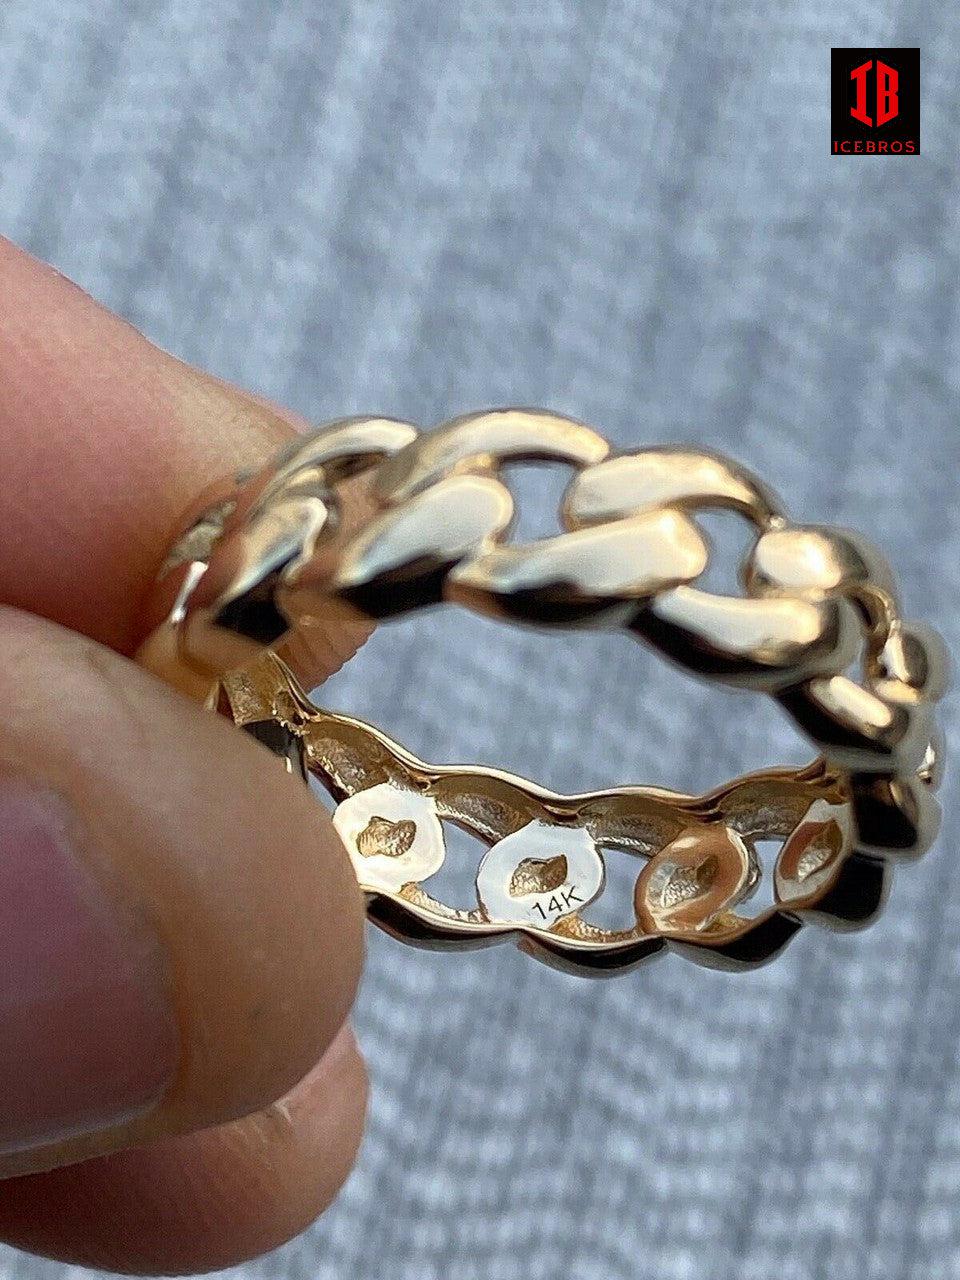 Unisex Solid Real 14k Gold Miami Cuban Ring 6mm Wedding Band Pinky Ring Sz 7-13 ITALY